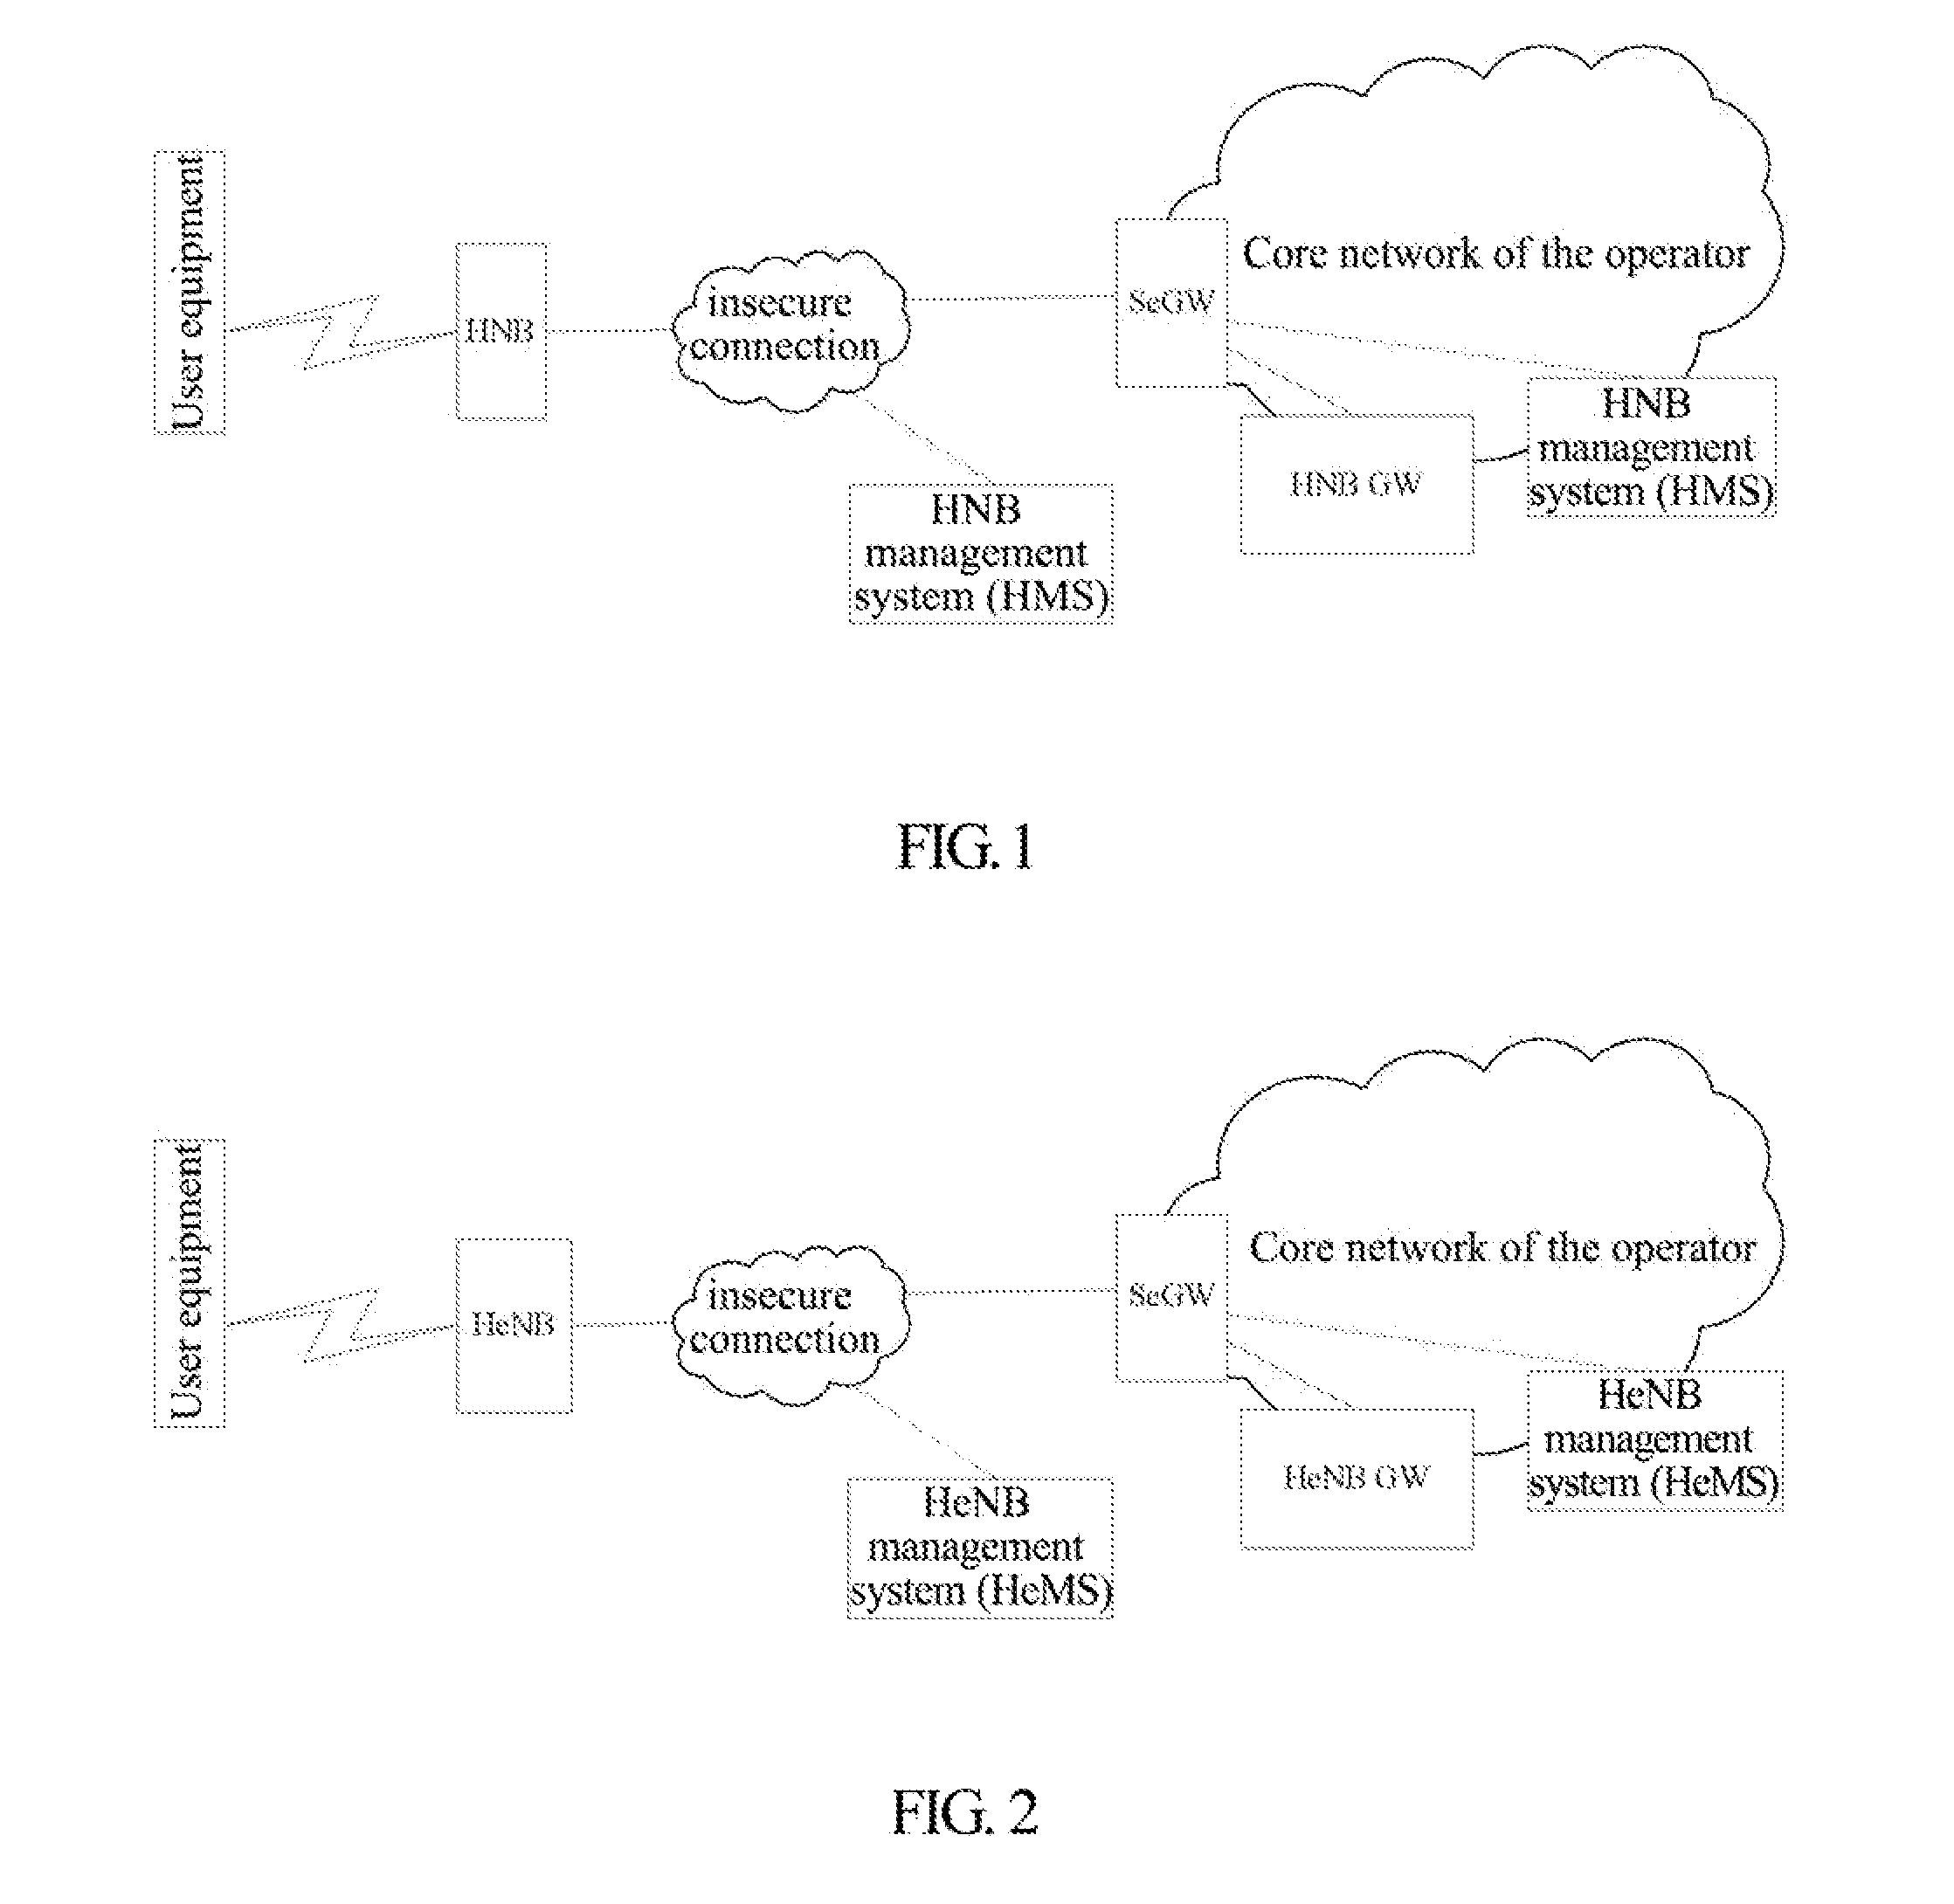 Network Accessing Device and Method for Mutual Authentication Therebetween